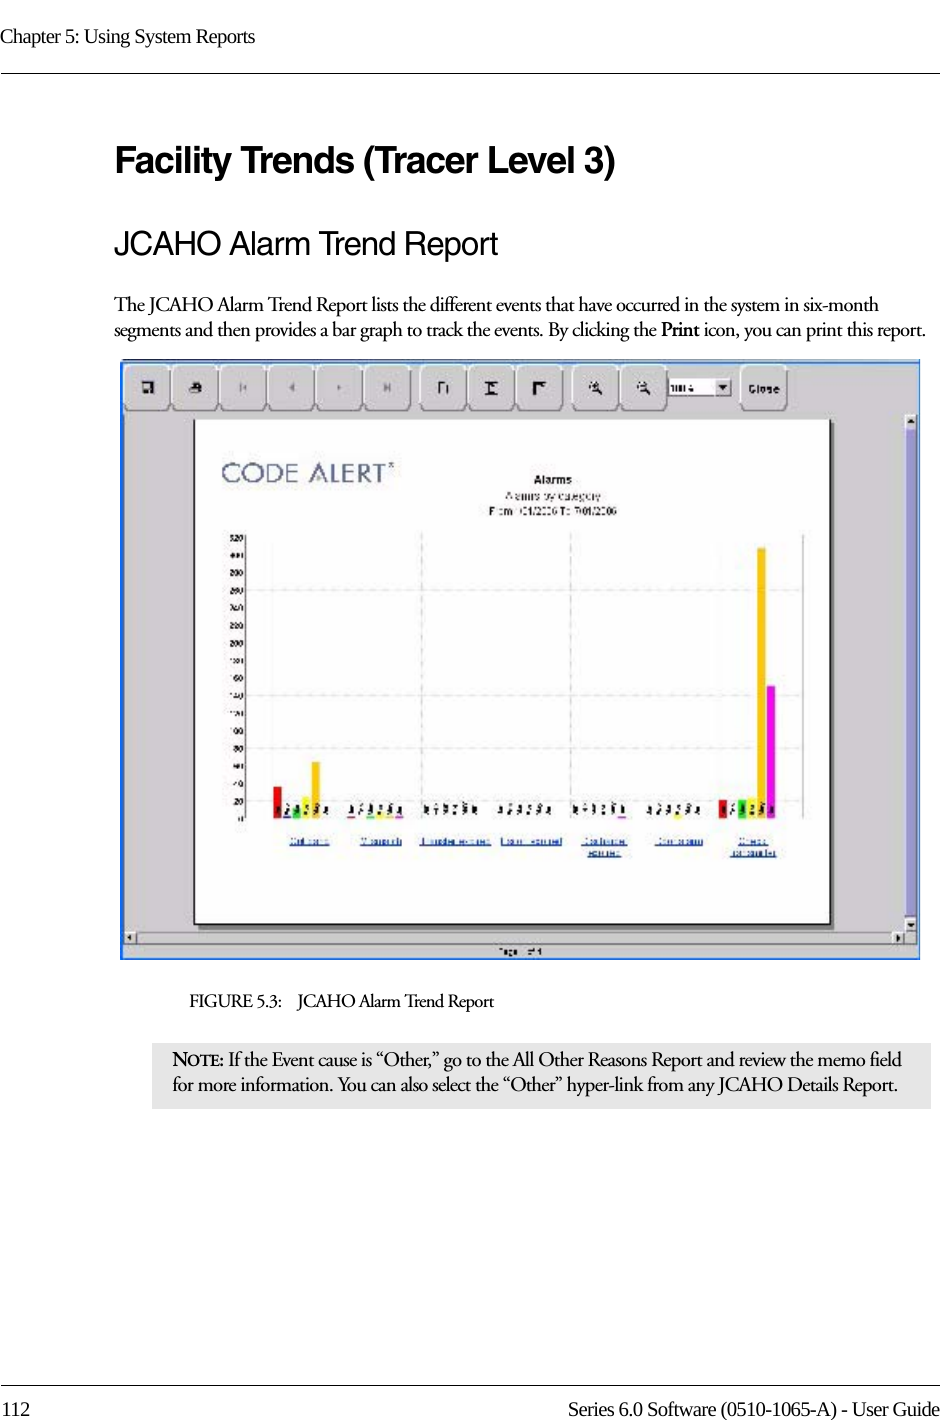 Chapter 5: Using System Reports112 Series 6.0 Software (0510-1065-A) - User GuideFacility Trends (Tracer Level 3)JCAHO Alarm Trend ReportThe JCAHO Alarm Trend Report lists the different events that have occurred in the system in six-month segments and then provides a bar graph to track the events. By clicking the Print icon, you can print this report.FIGURE 5.3:    JCAHO Alarm Trend ReportNOTE: If the Event cause is “Other,” go to the All Other Reasons Report and review the memo field for more information. You can also select the “Other” hyper-link from any JCAHO Details Report.